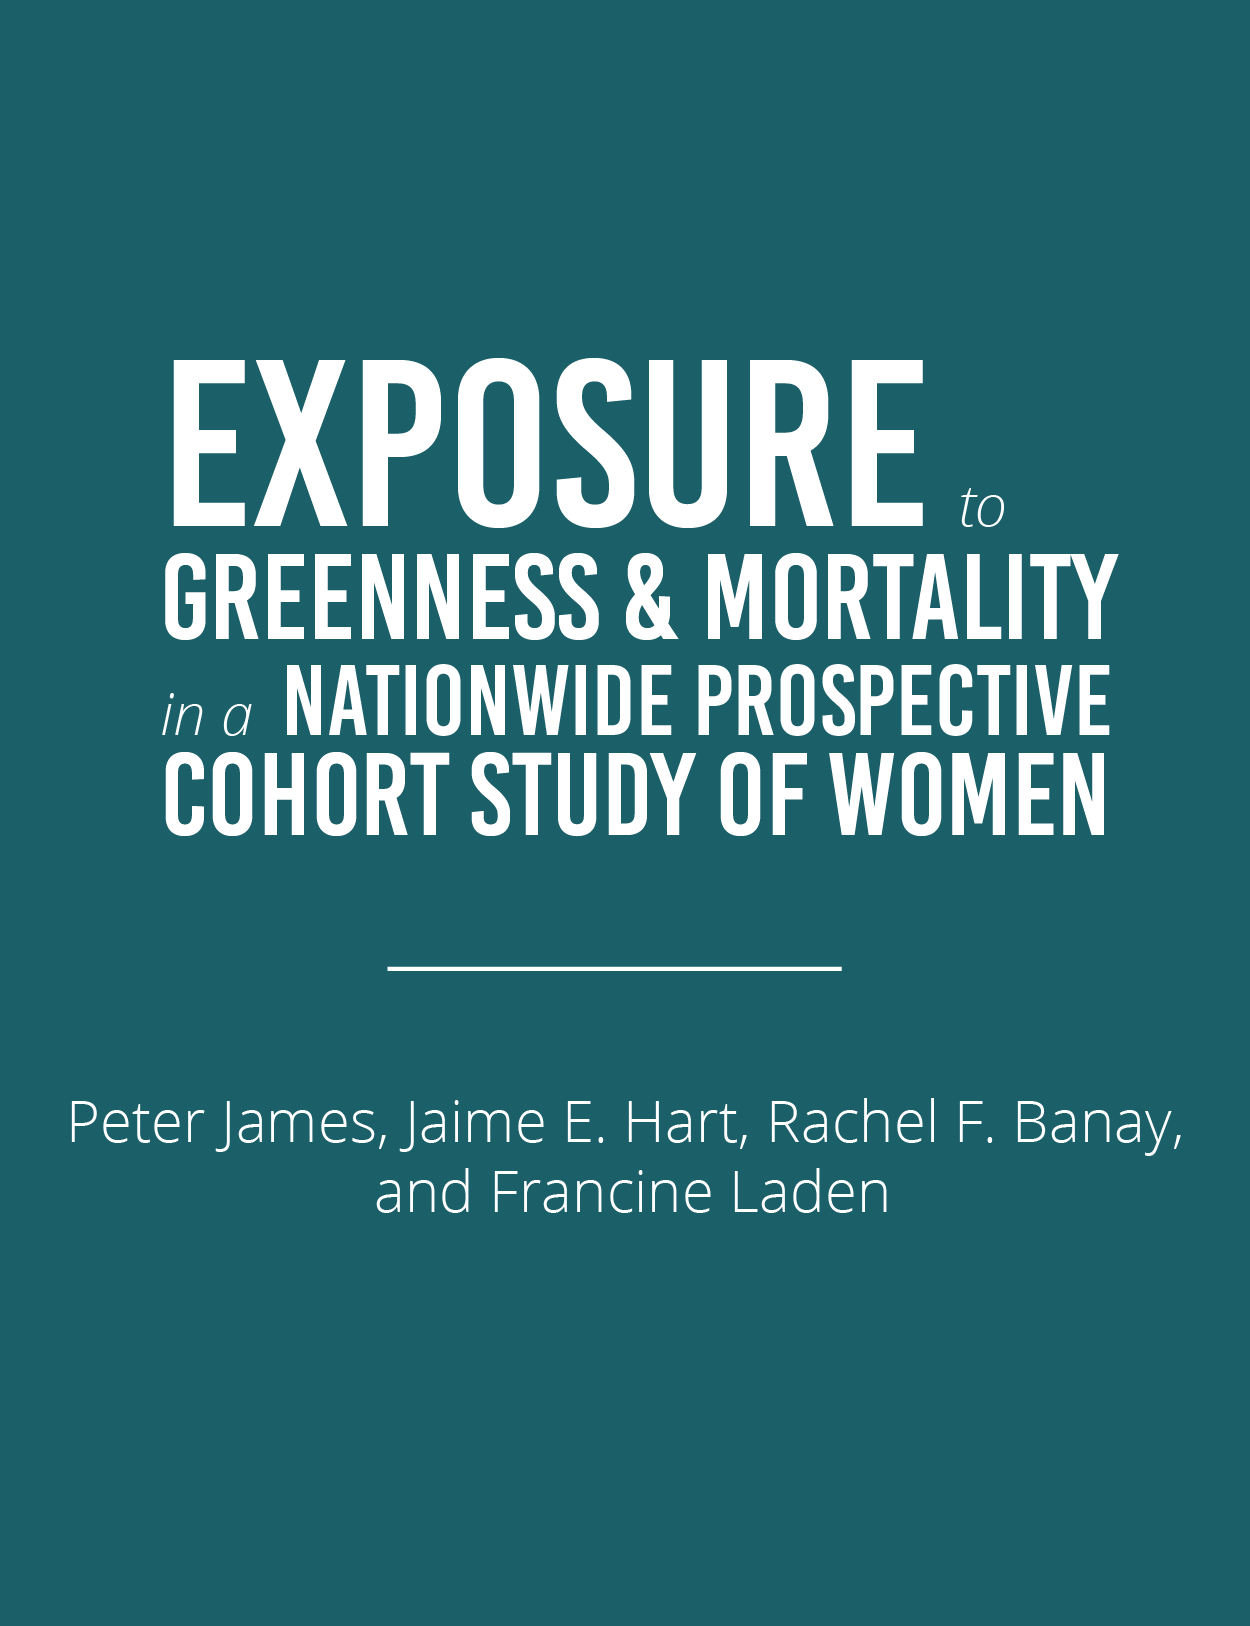 Exposure to Greenness & MortalityFeatured Image